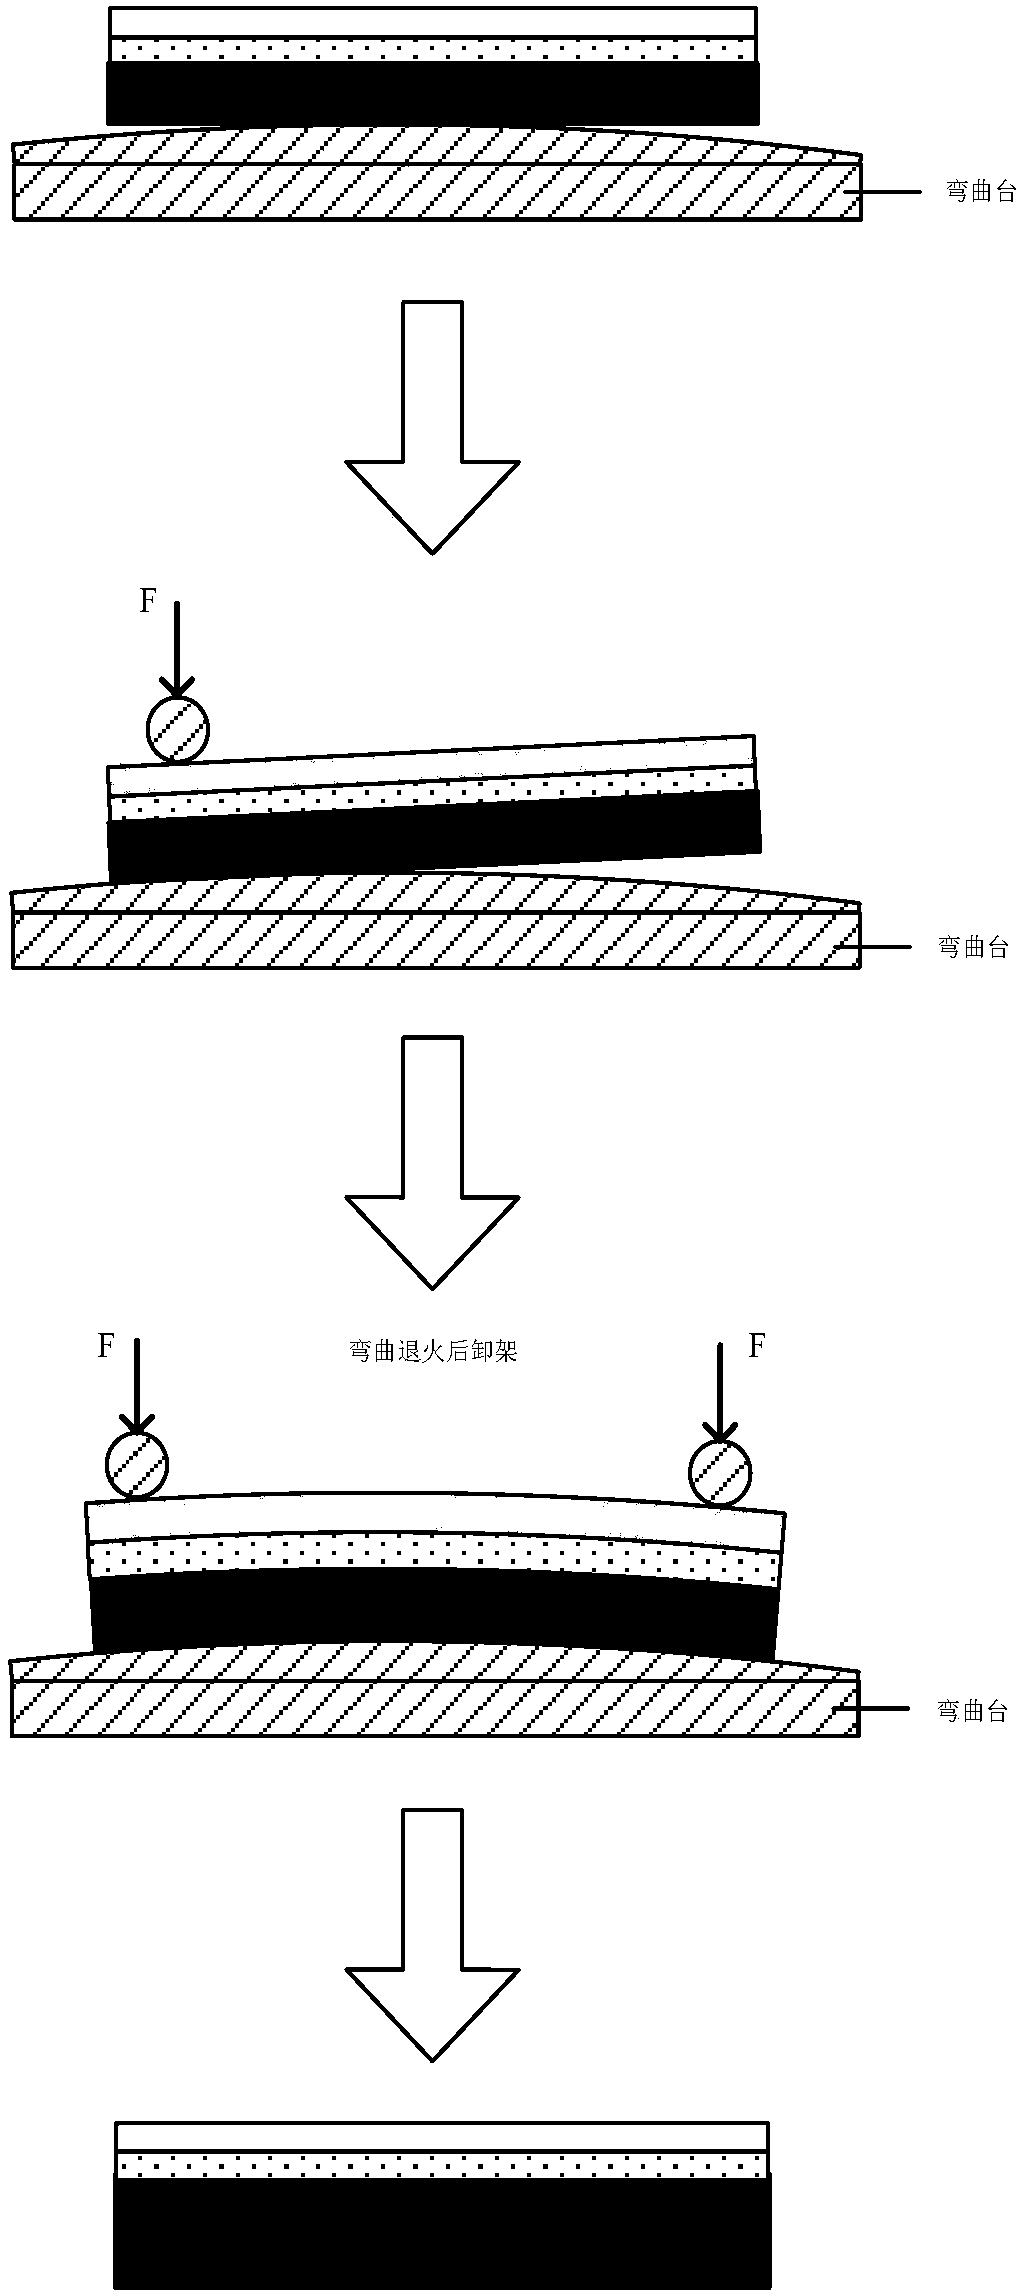 Fabrication method of wafer-level uniaxial strain geoi based on silicon nitride stress film and scale effect